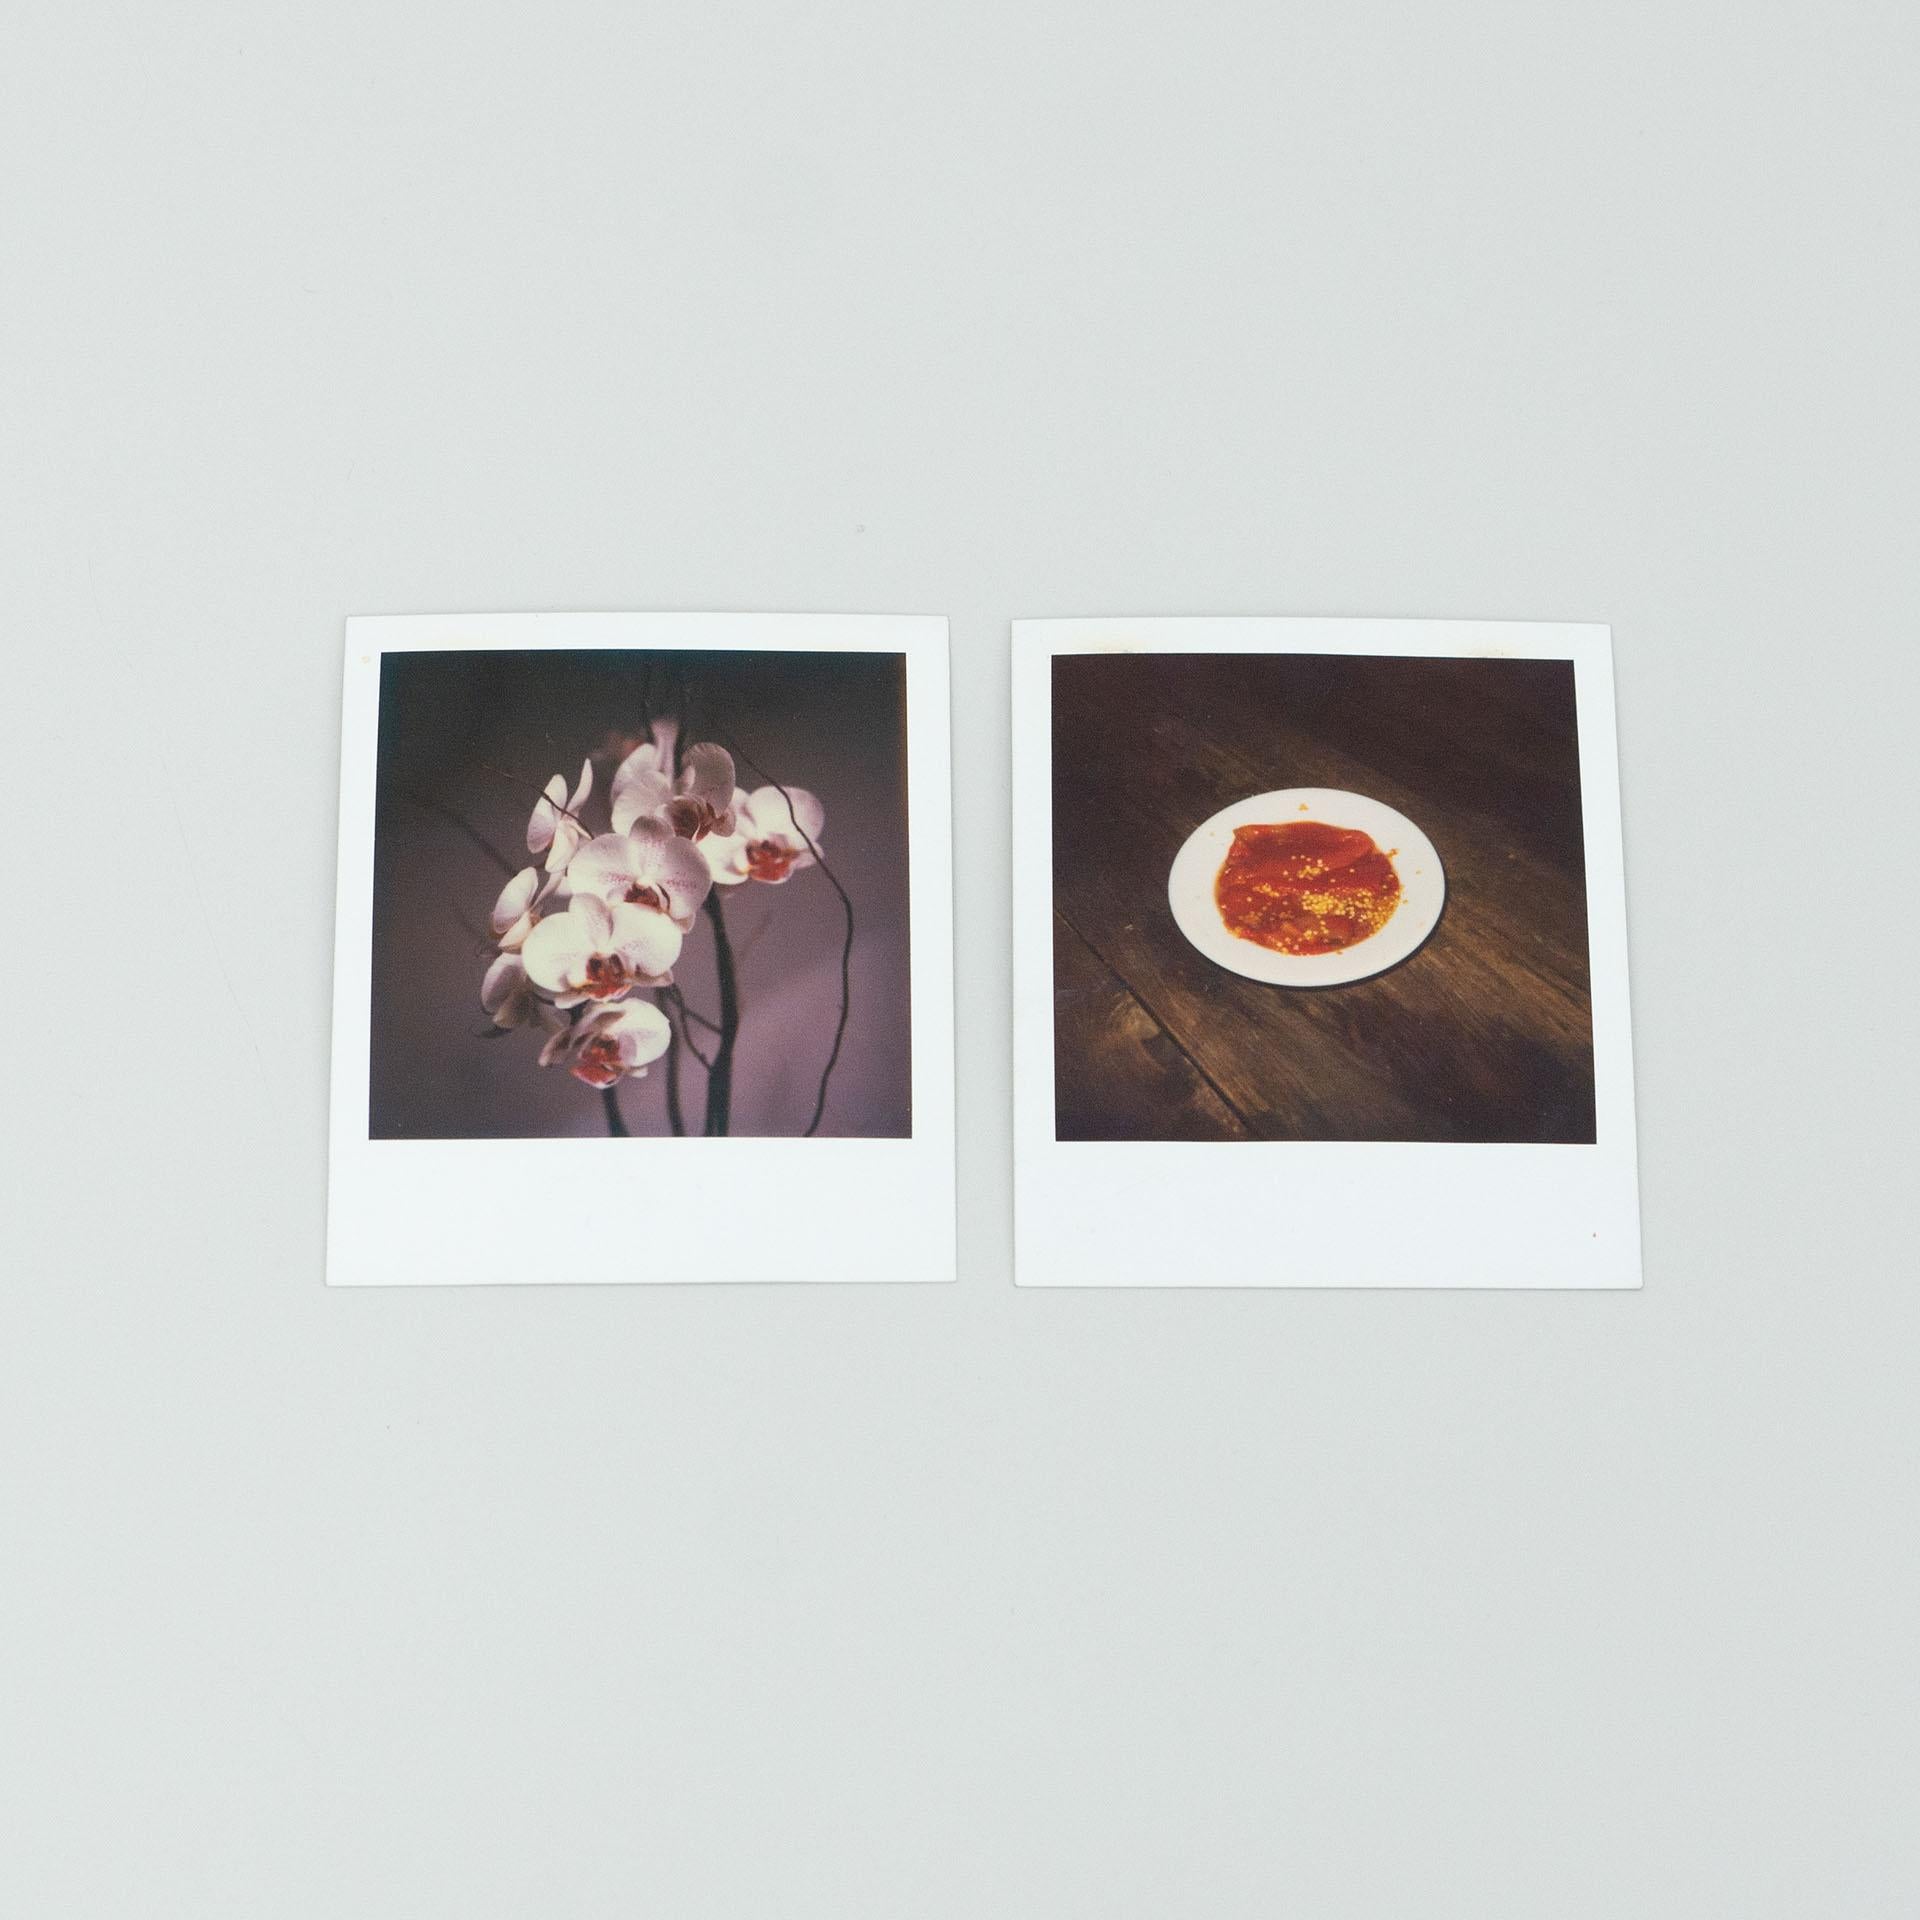 Set of Polaroid photographs by Miquel Arnal.

In original condition, with minor wear consistent with age and use, preserving a beautiful patina.

Material:
Photographic paper

Dimensions (each one):
D 0.1 cm x W 9 cm x H 11 cm

About the